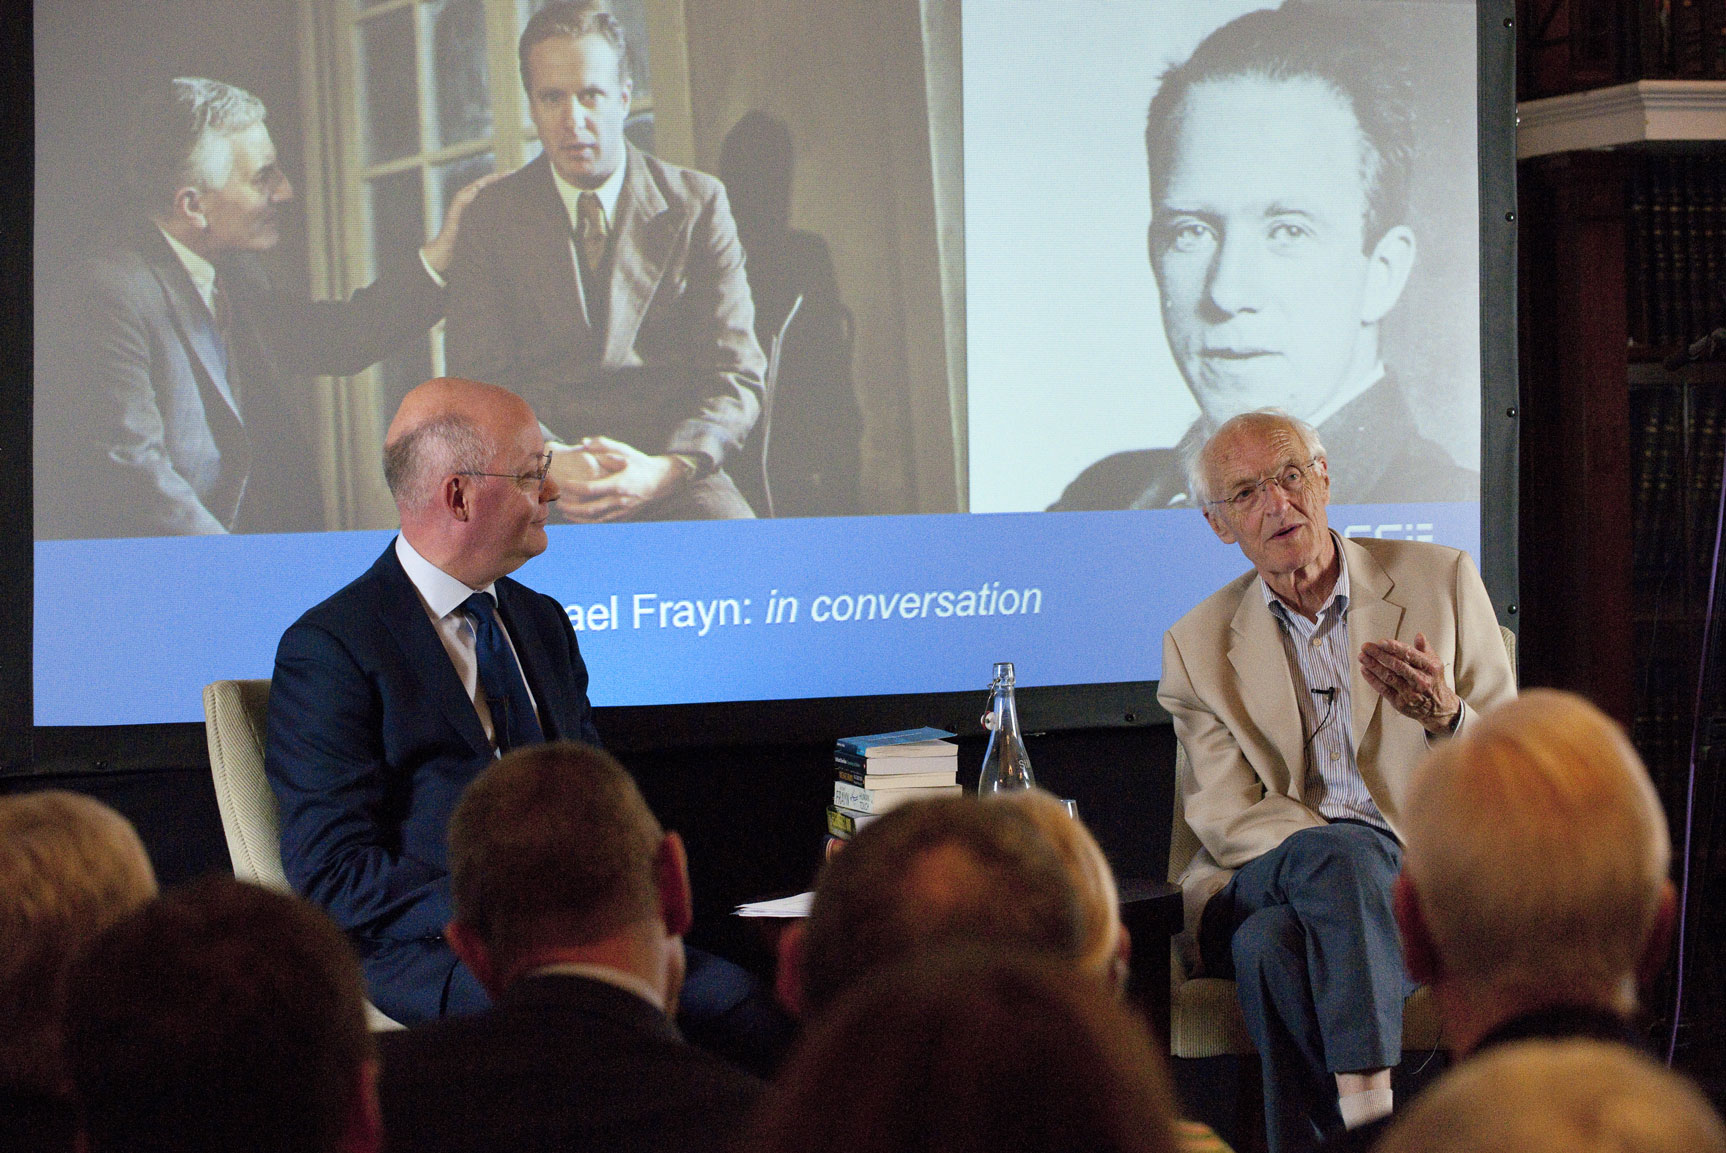 Ian Blatchford, Director of the Science Museum, in conversation with Michael Frayn